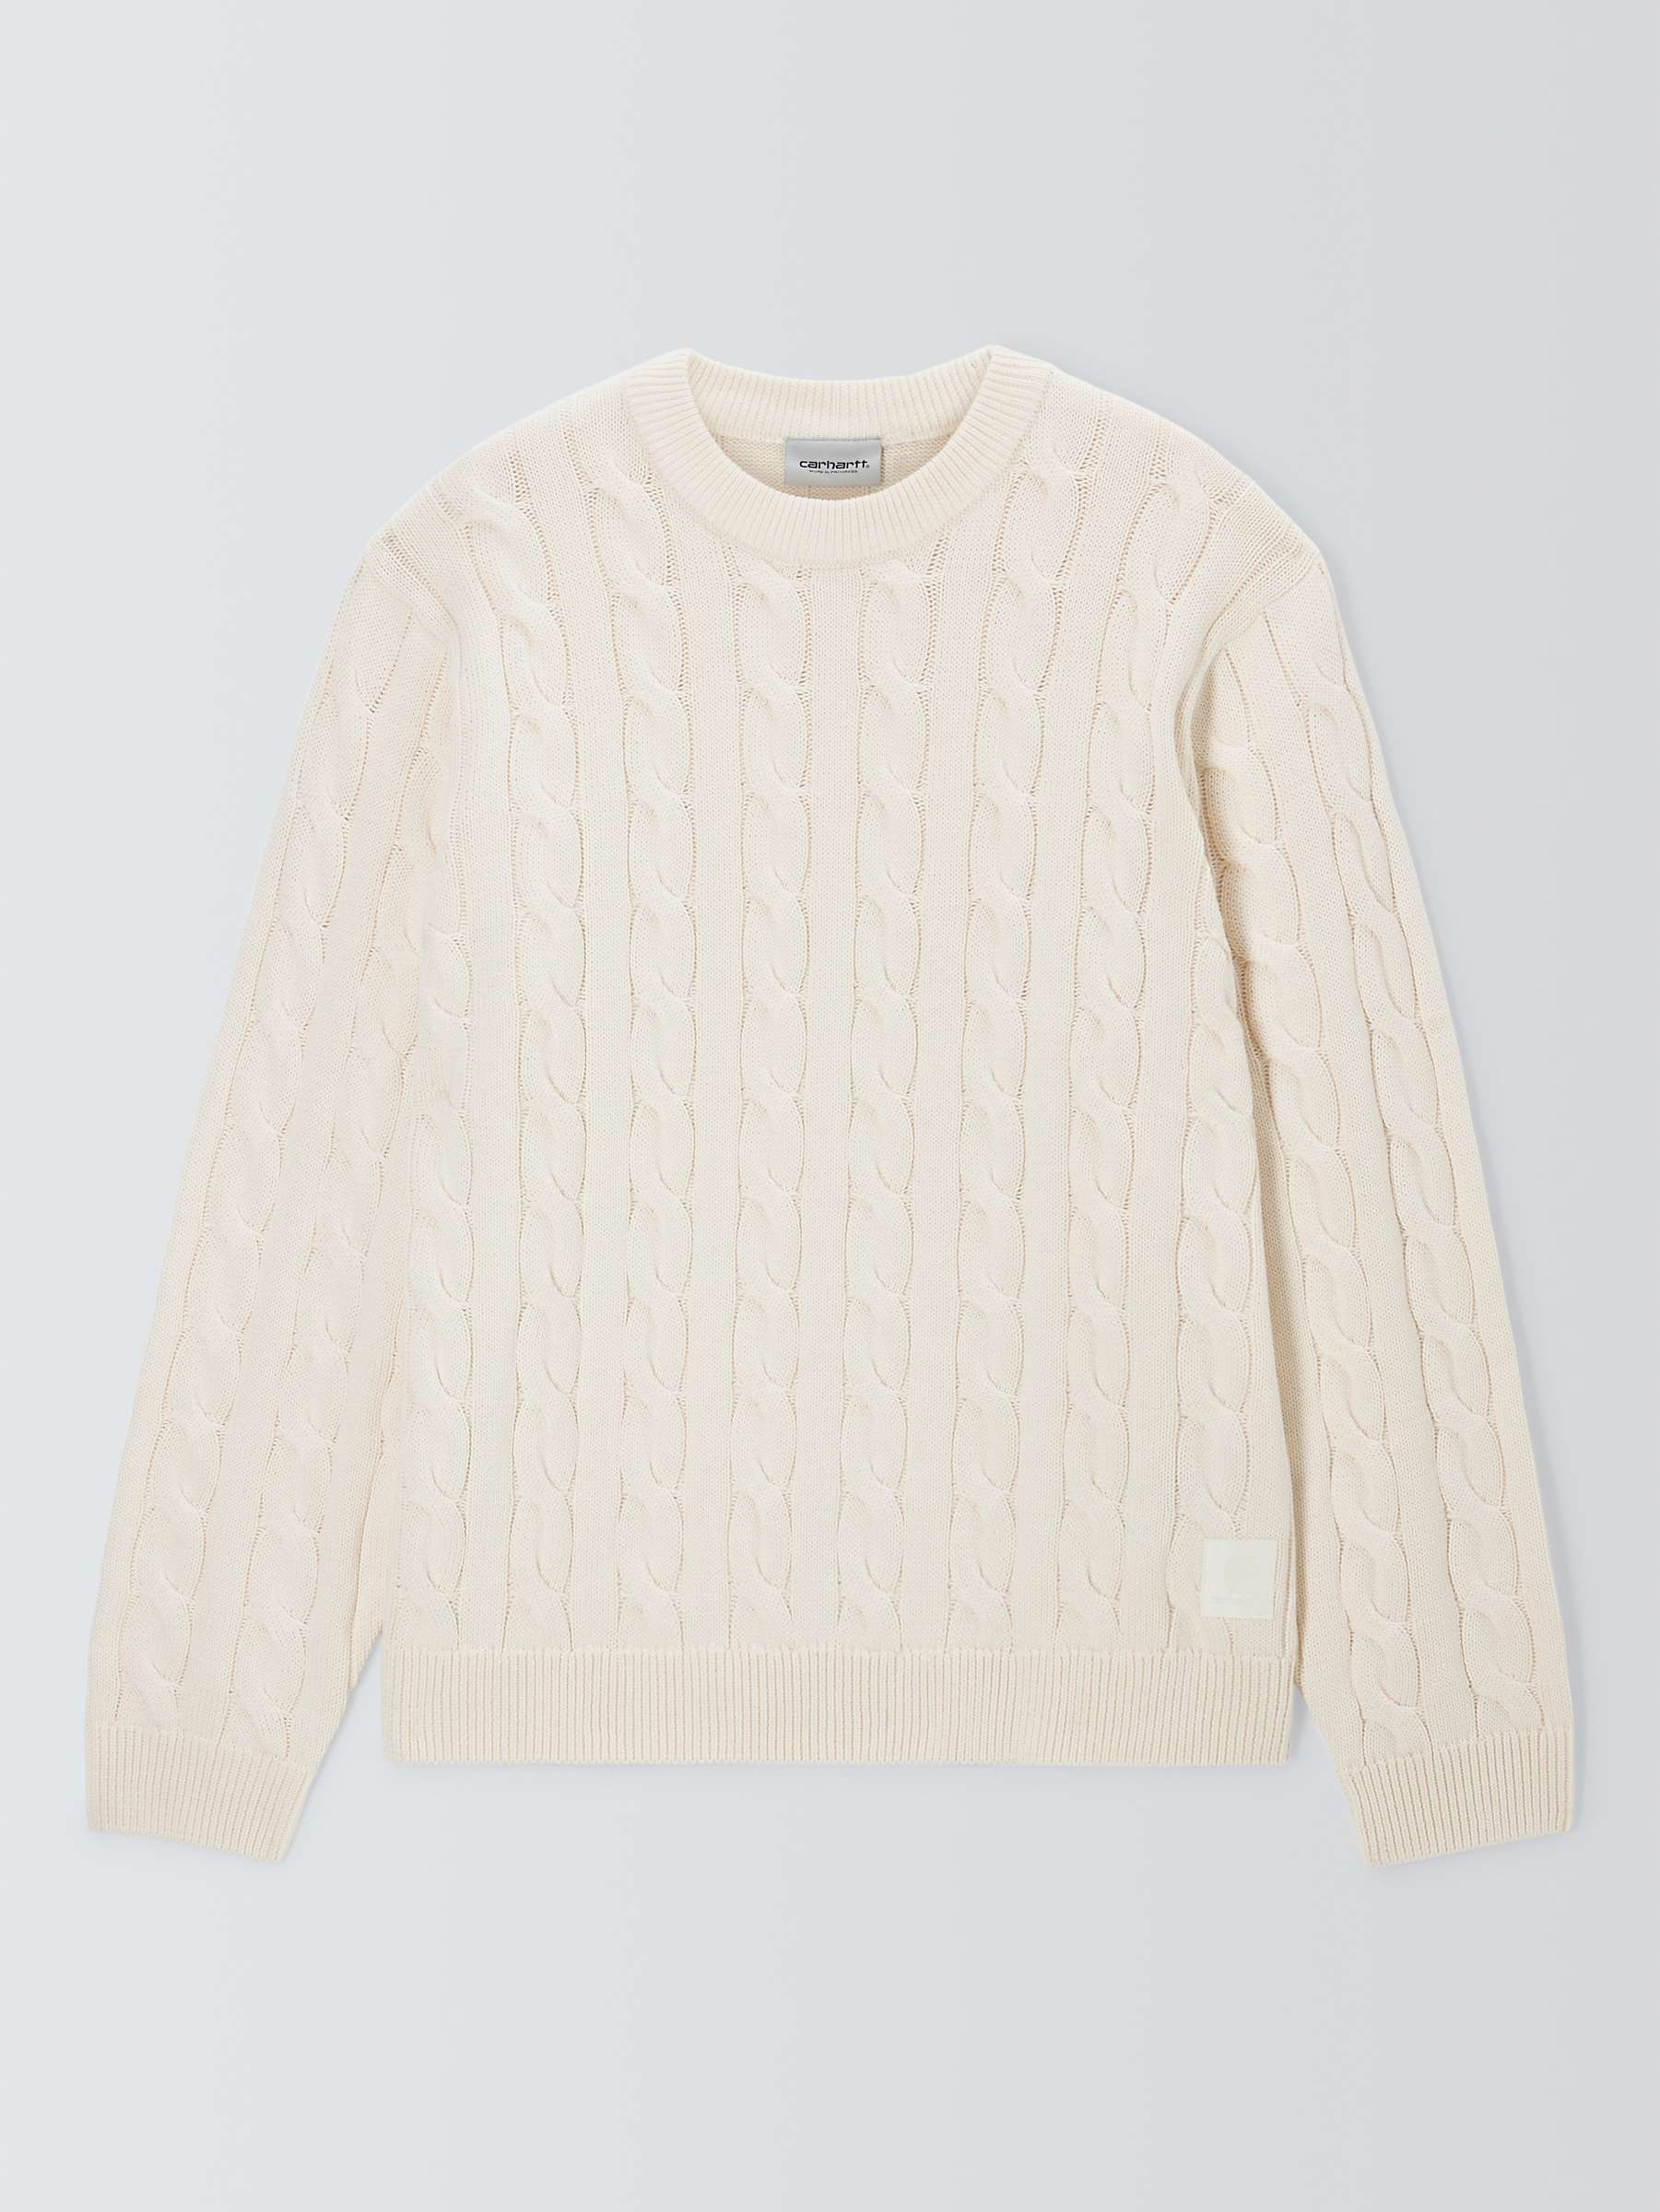 Buy Carhartt WIP Cambell Cable Knit Jumper, Natural Online at johnlewis.com